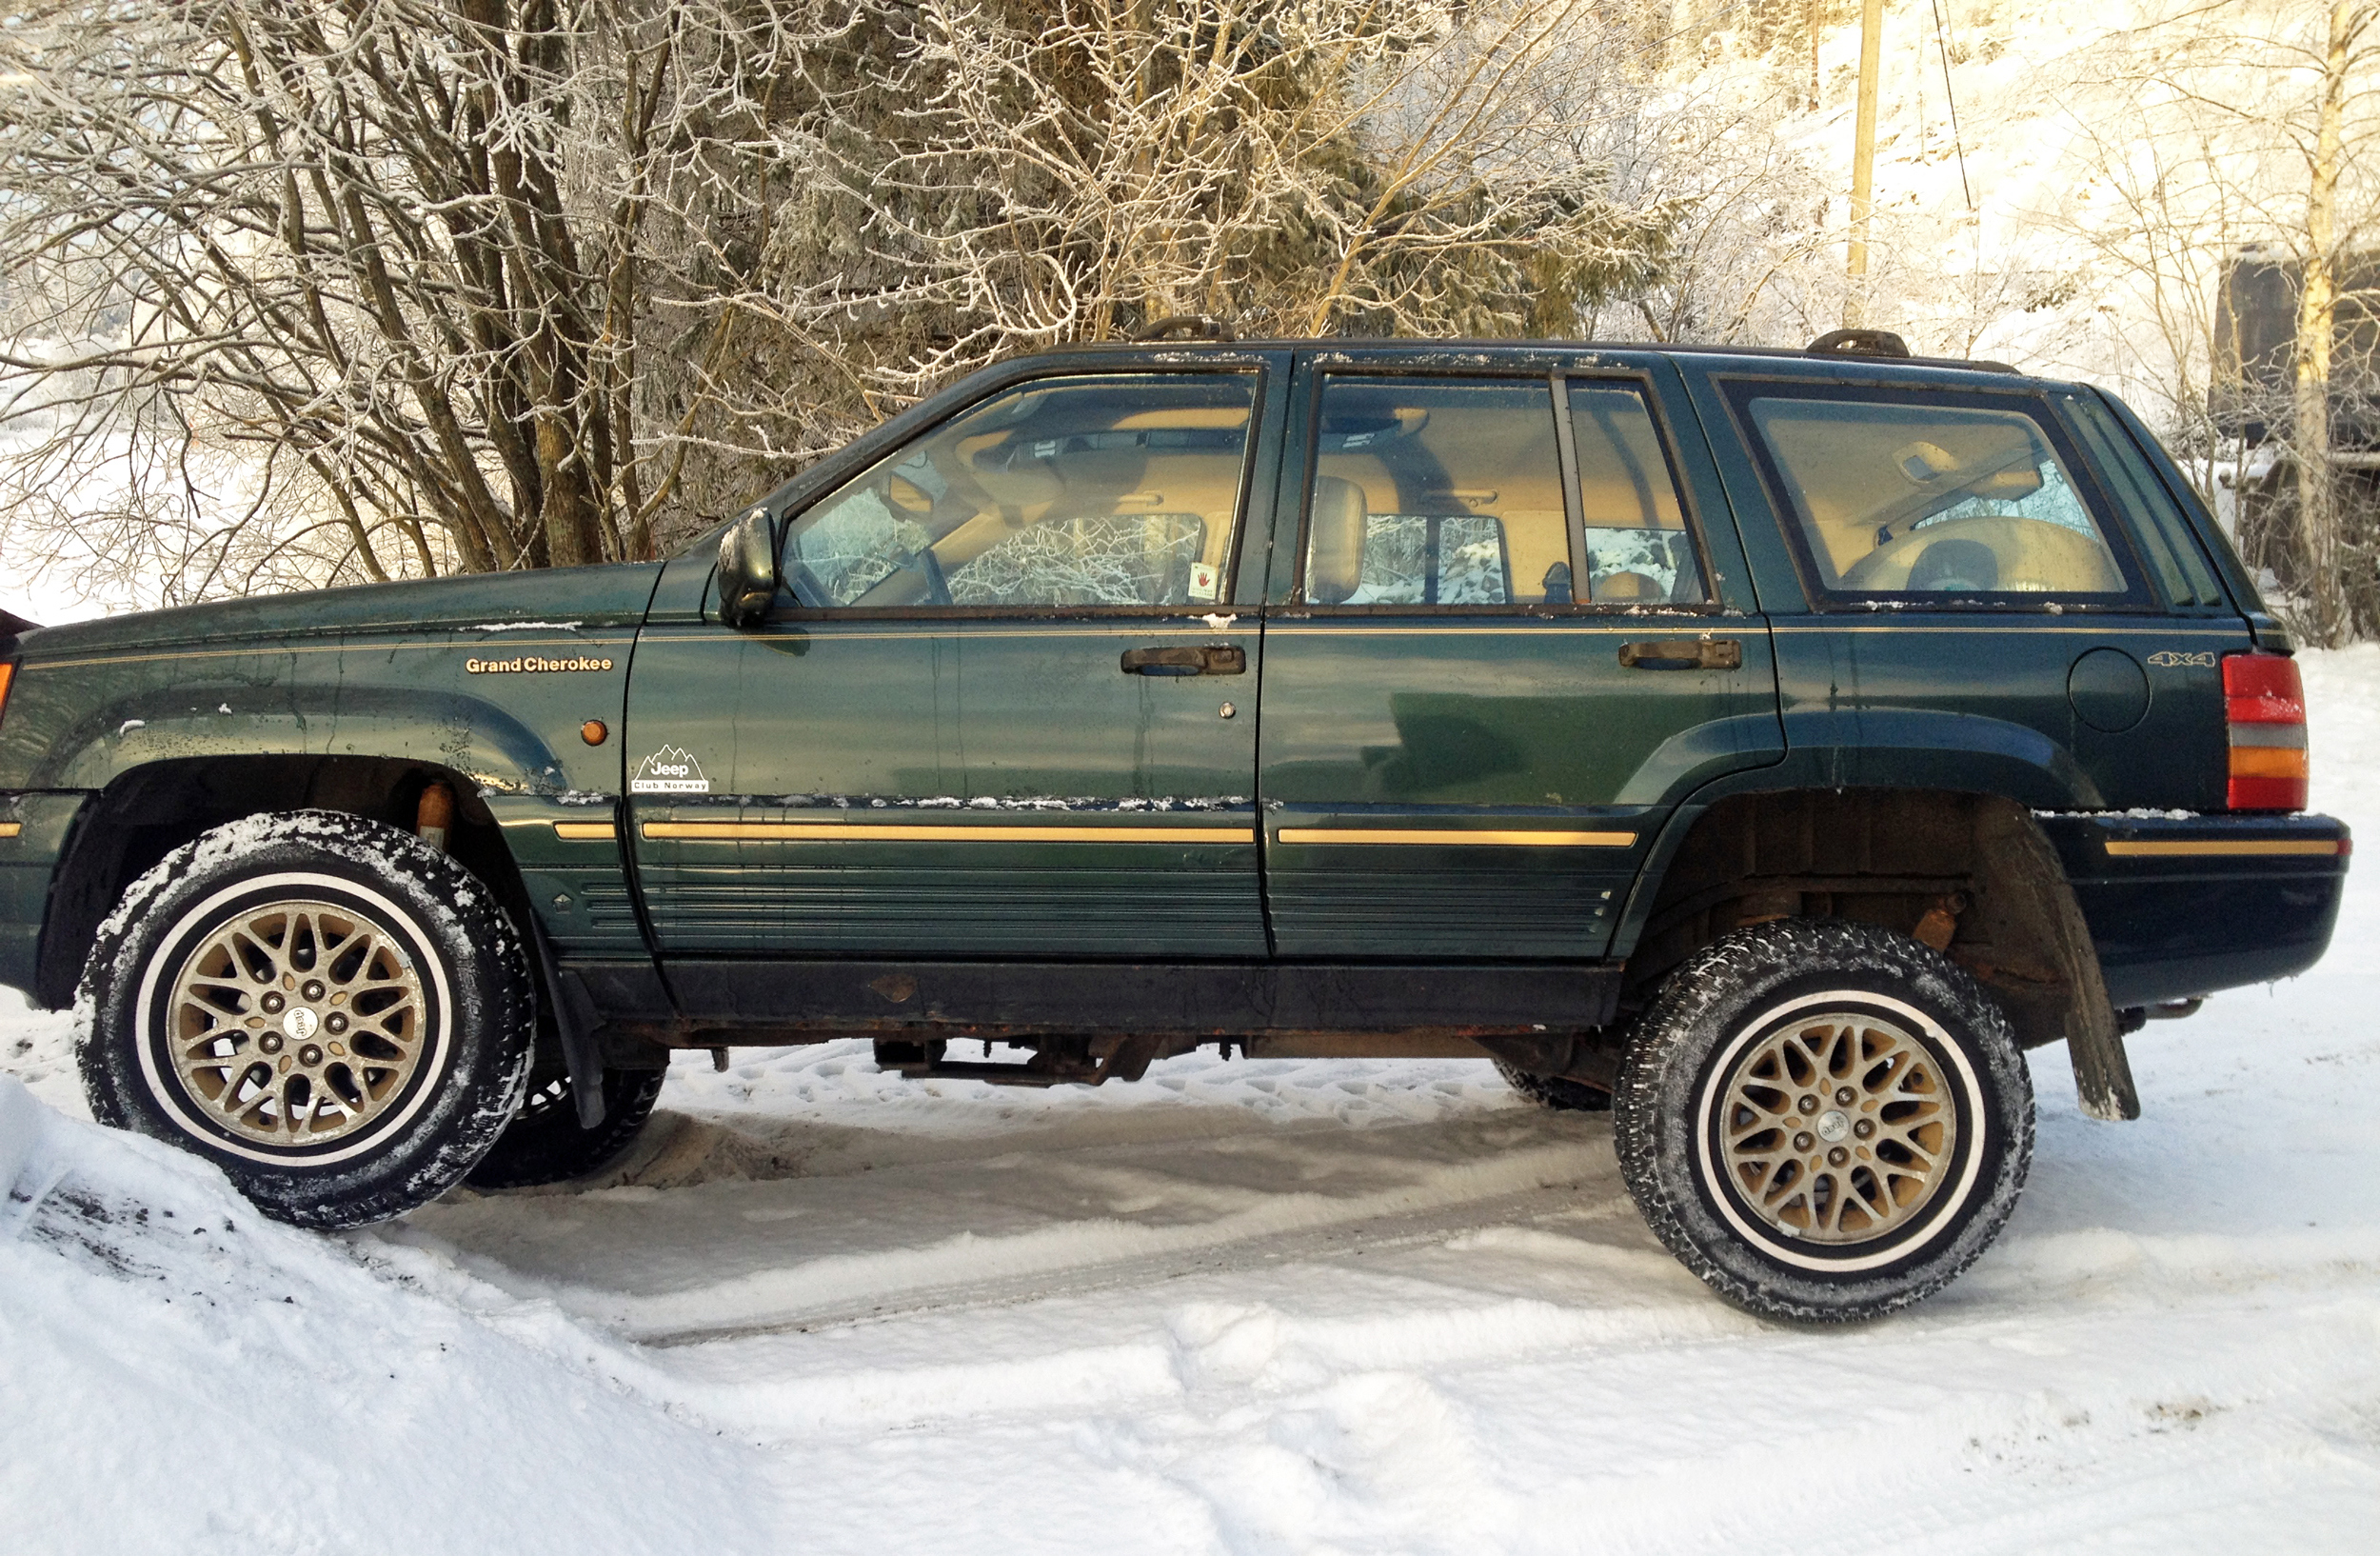 141-1994 Jeep Grand Cherokee 5.2 Litre V8 Limited.